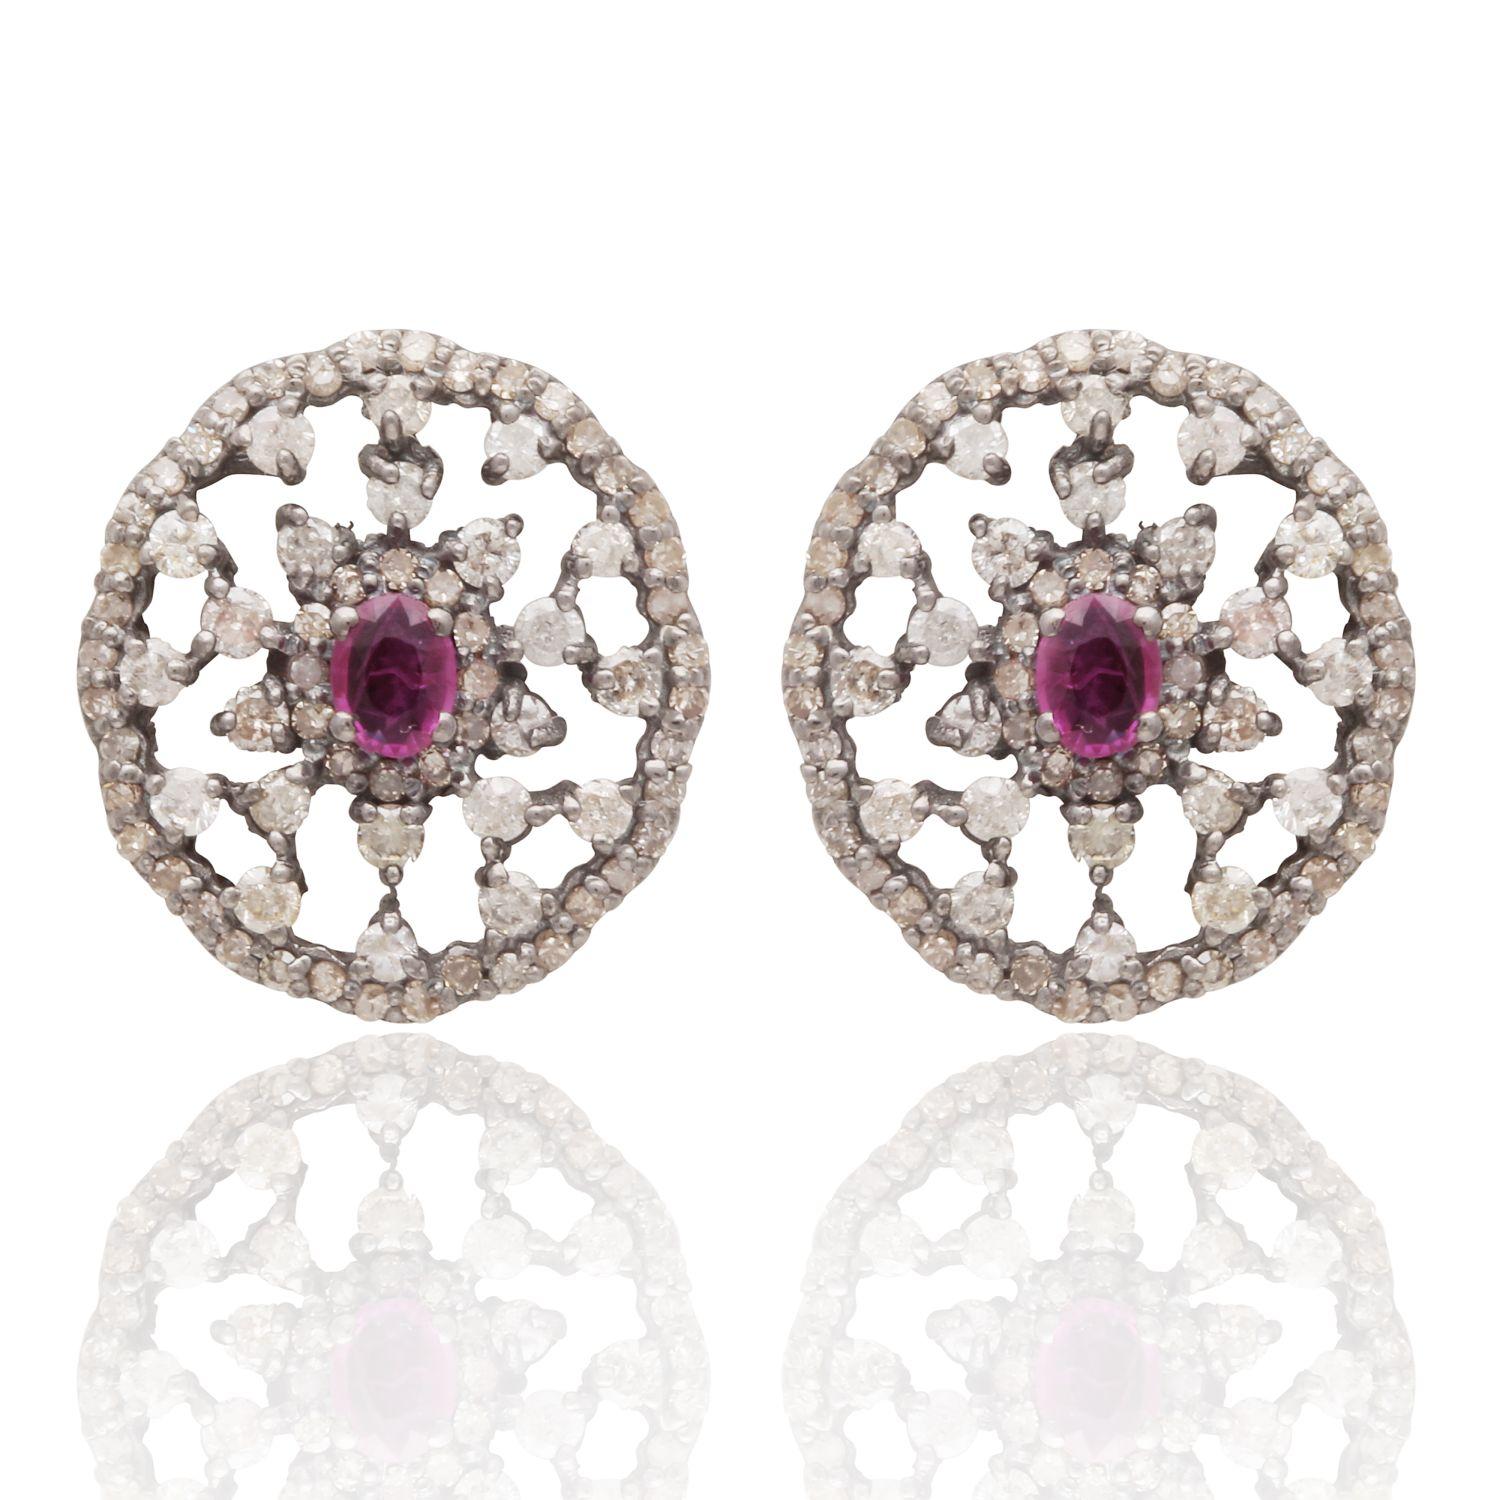 A beautifully crafted pair of mix silver and gold stud earrings with diamonds and rubies. Perfect to wear everyday or to that special occasion! Please note that the mat be slight variations in stone carat, colour and weight as each piece is handmade